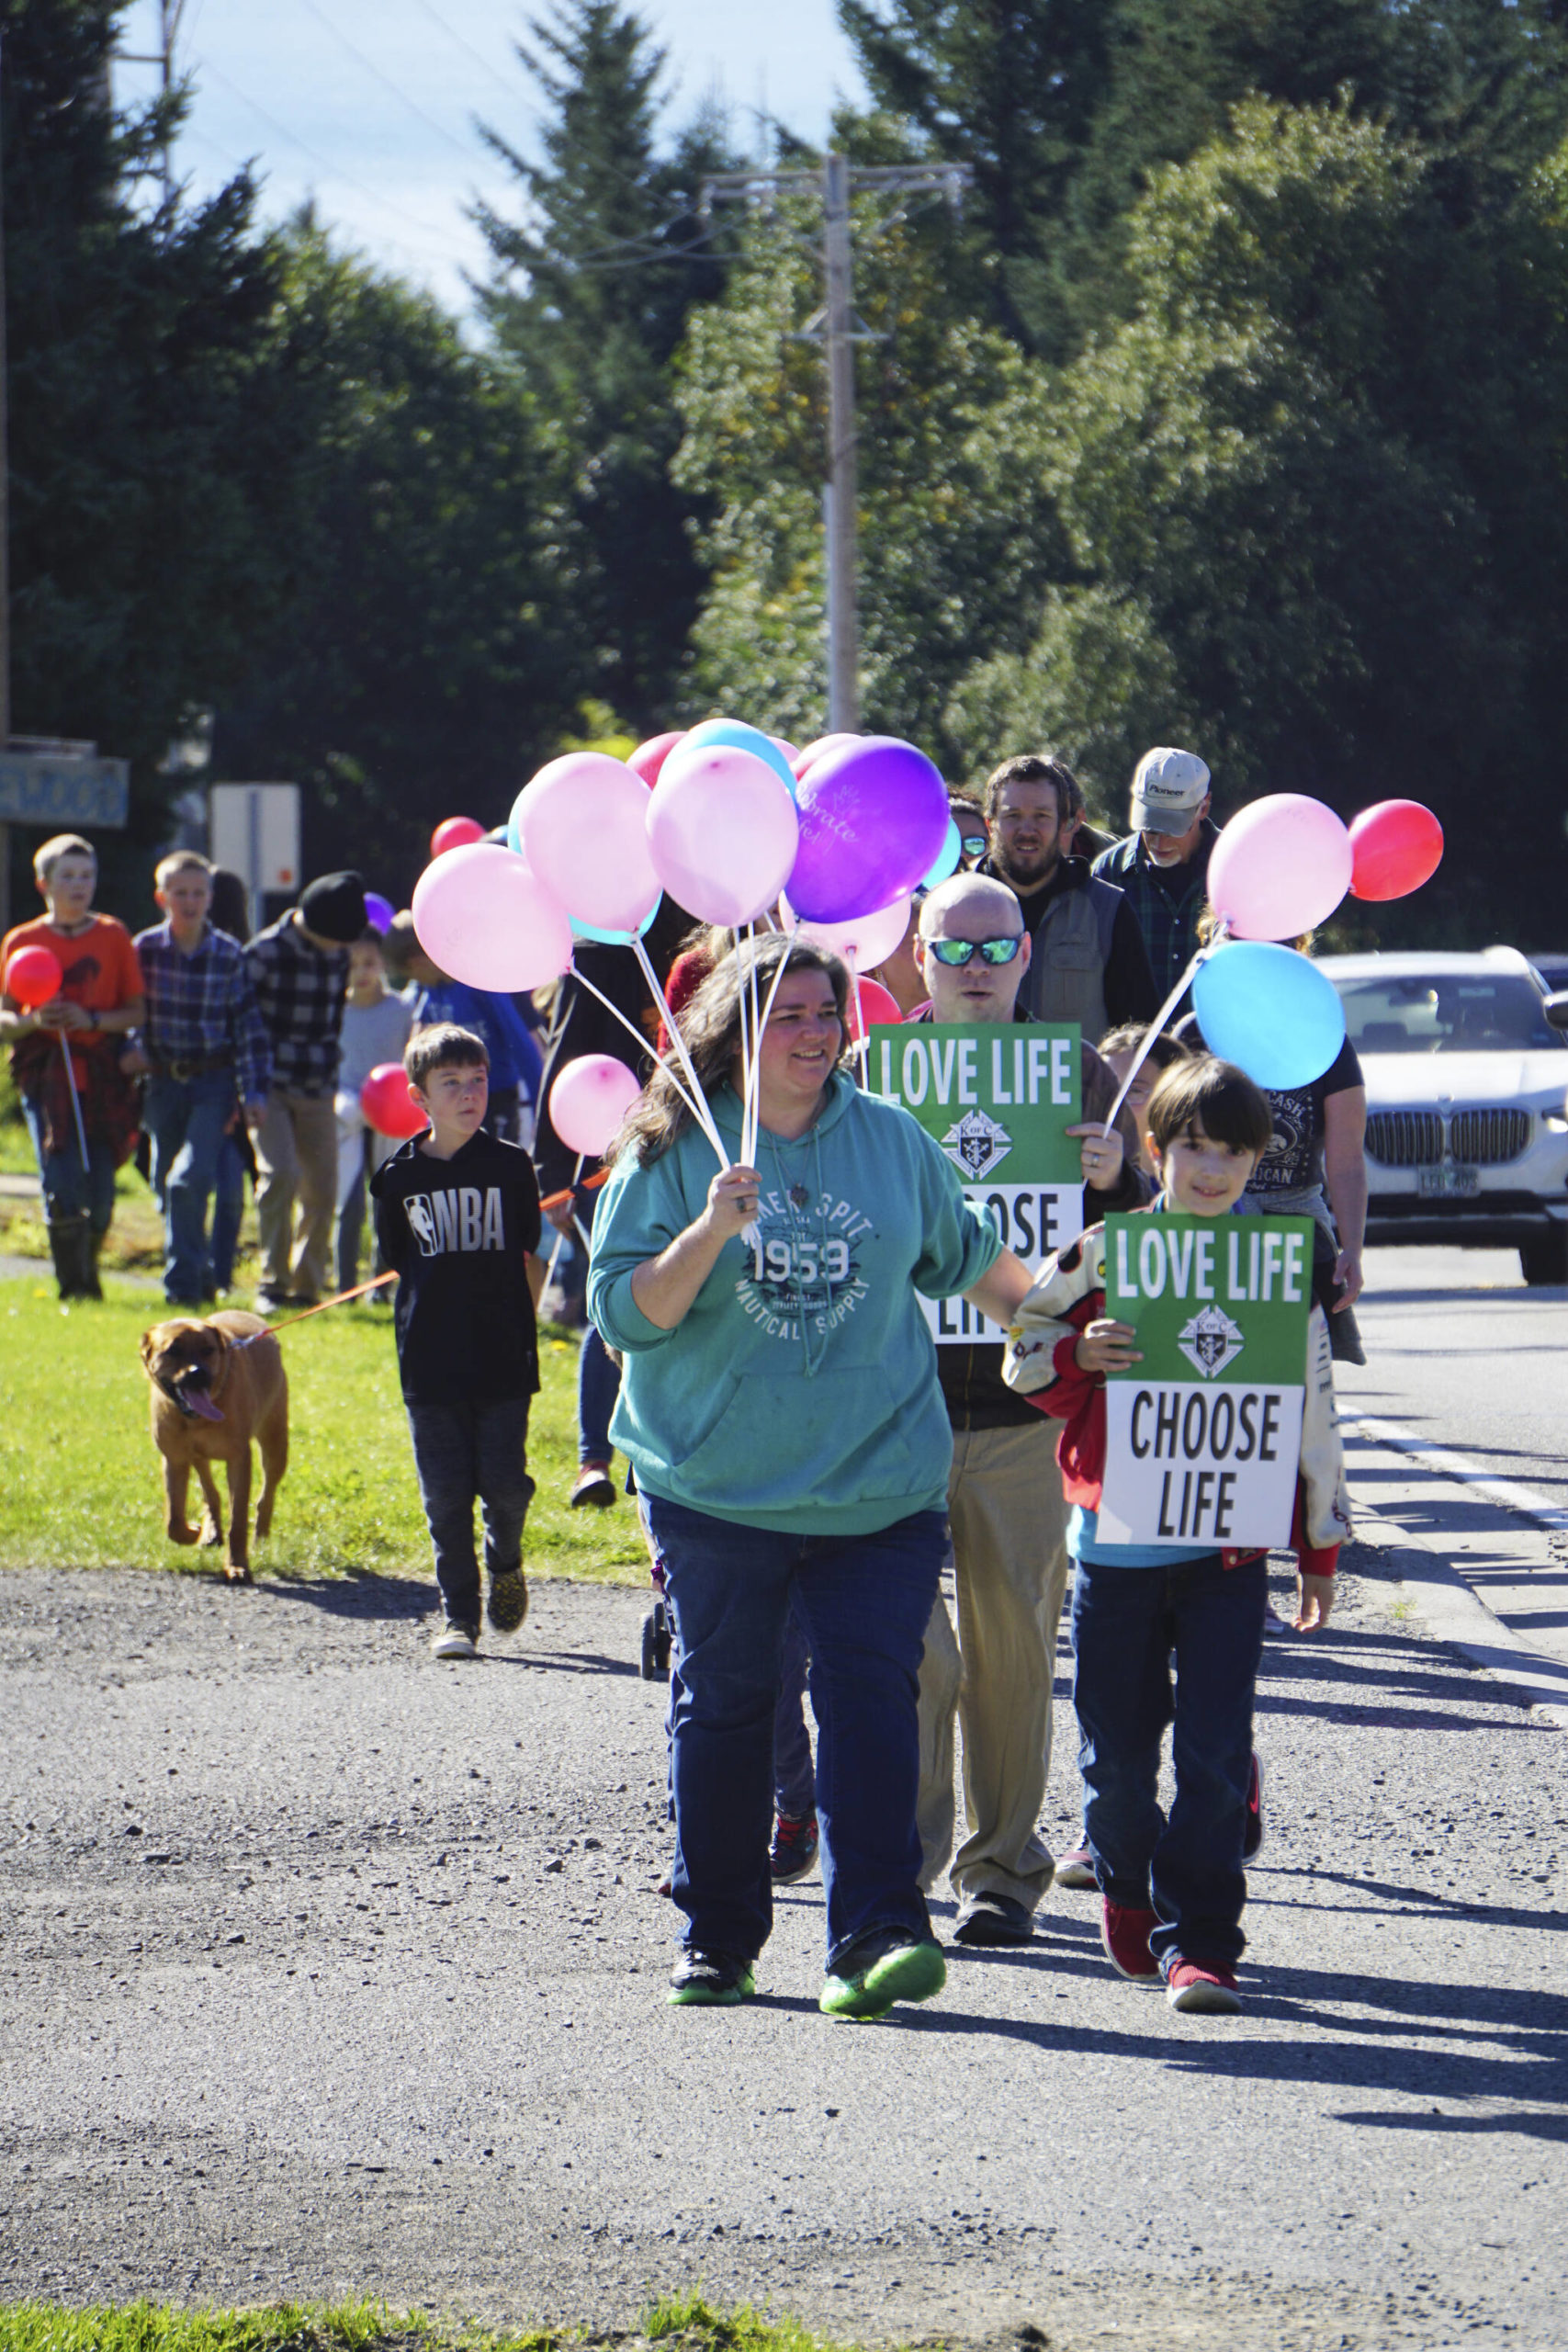 People with Walk for Life march up Bartlett Street to the Water’s Edge crisis pregnancy clinic on Monday, Sept. 5, 2022, in Homer, Alaska. About 140 people walked from the Assembly of God Church and Glacier View Baptist Church on East End Road along Pioneer Avenue and up Bartlett Street to show their support for pro-life efforts and opposition to abortion. (Photo by Michael Armstrong/Homer News)